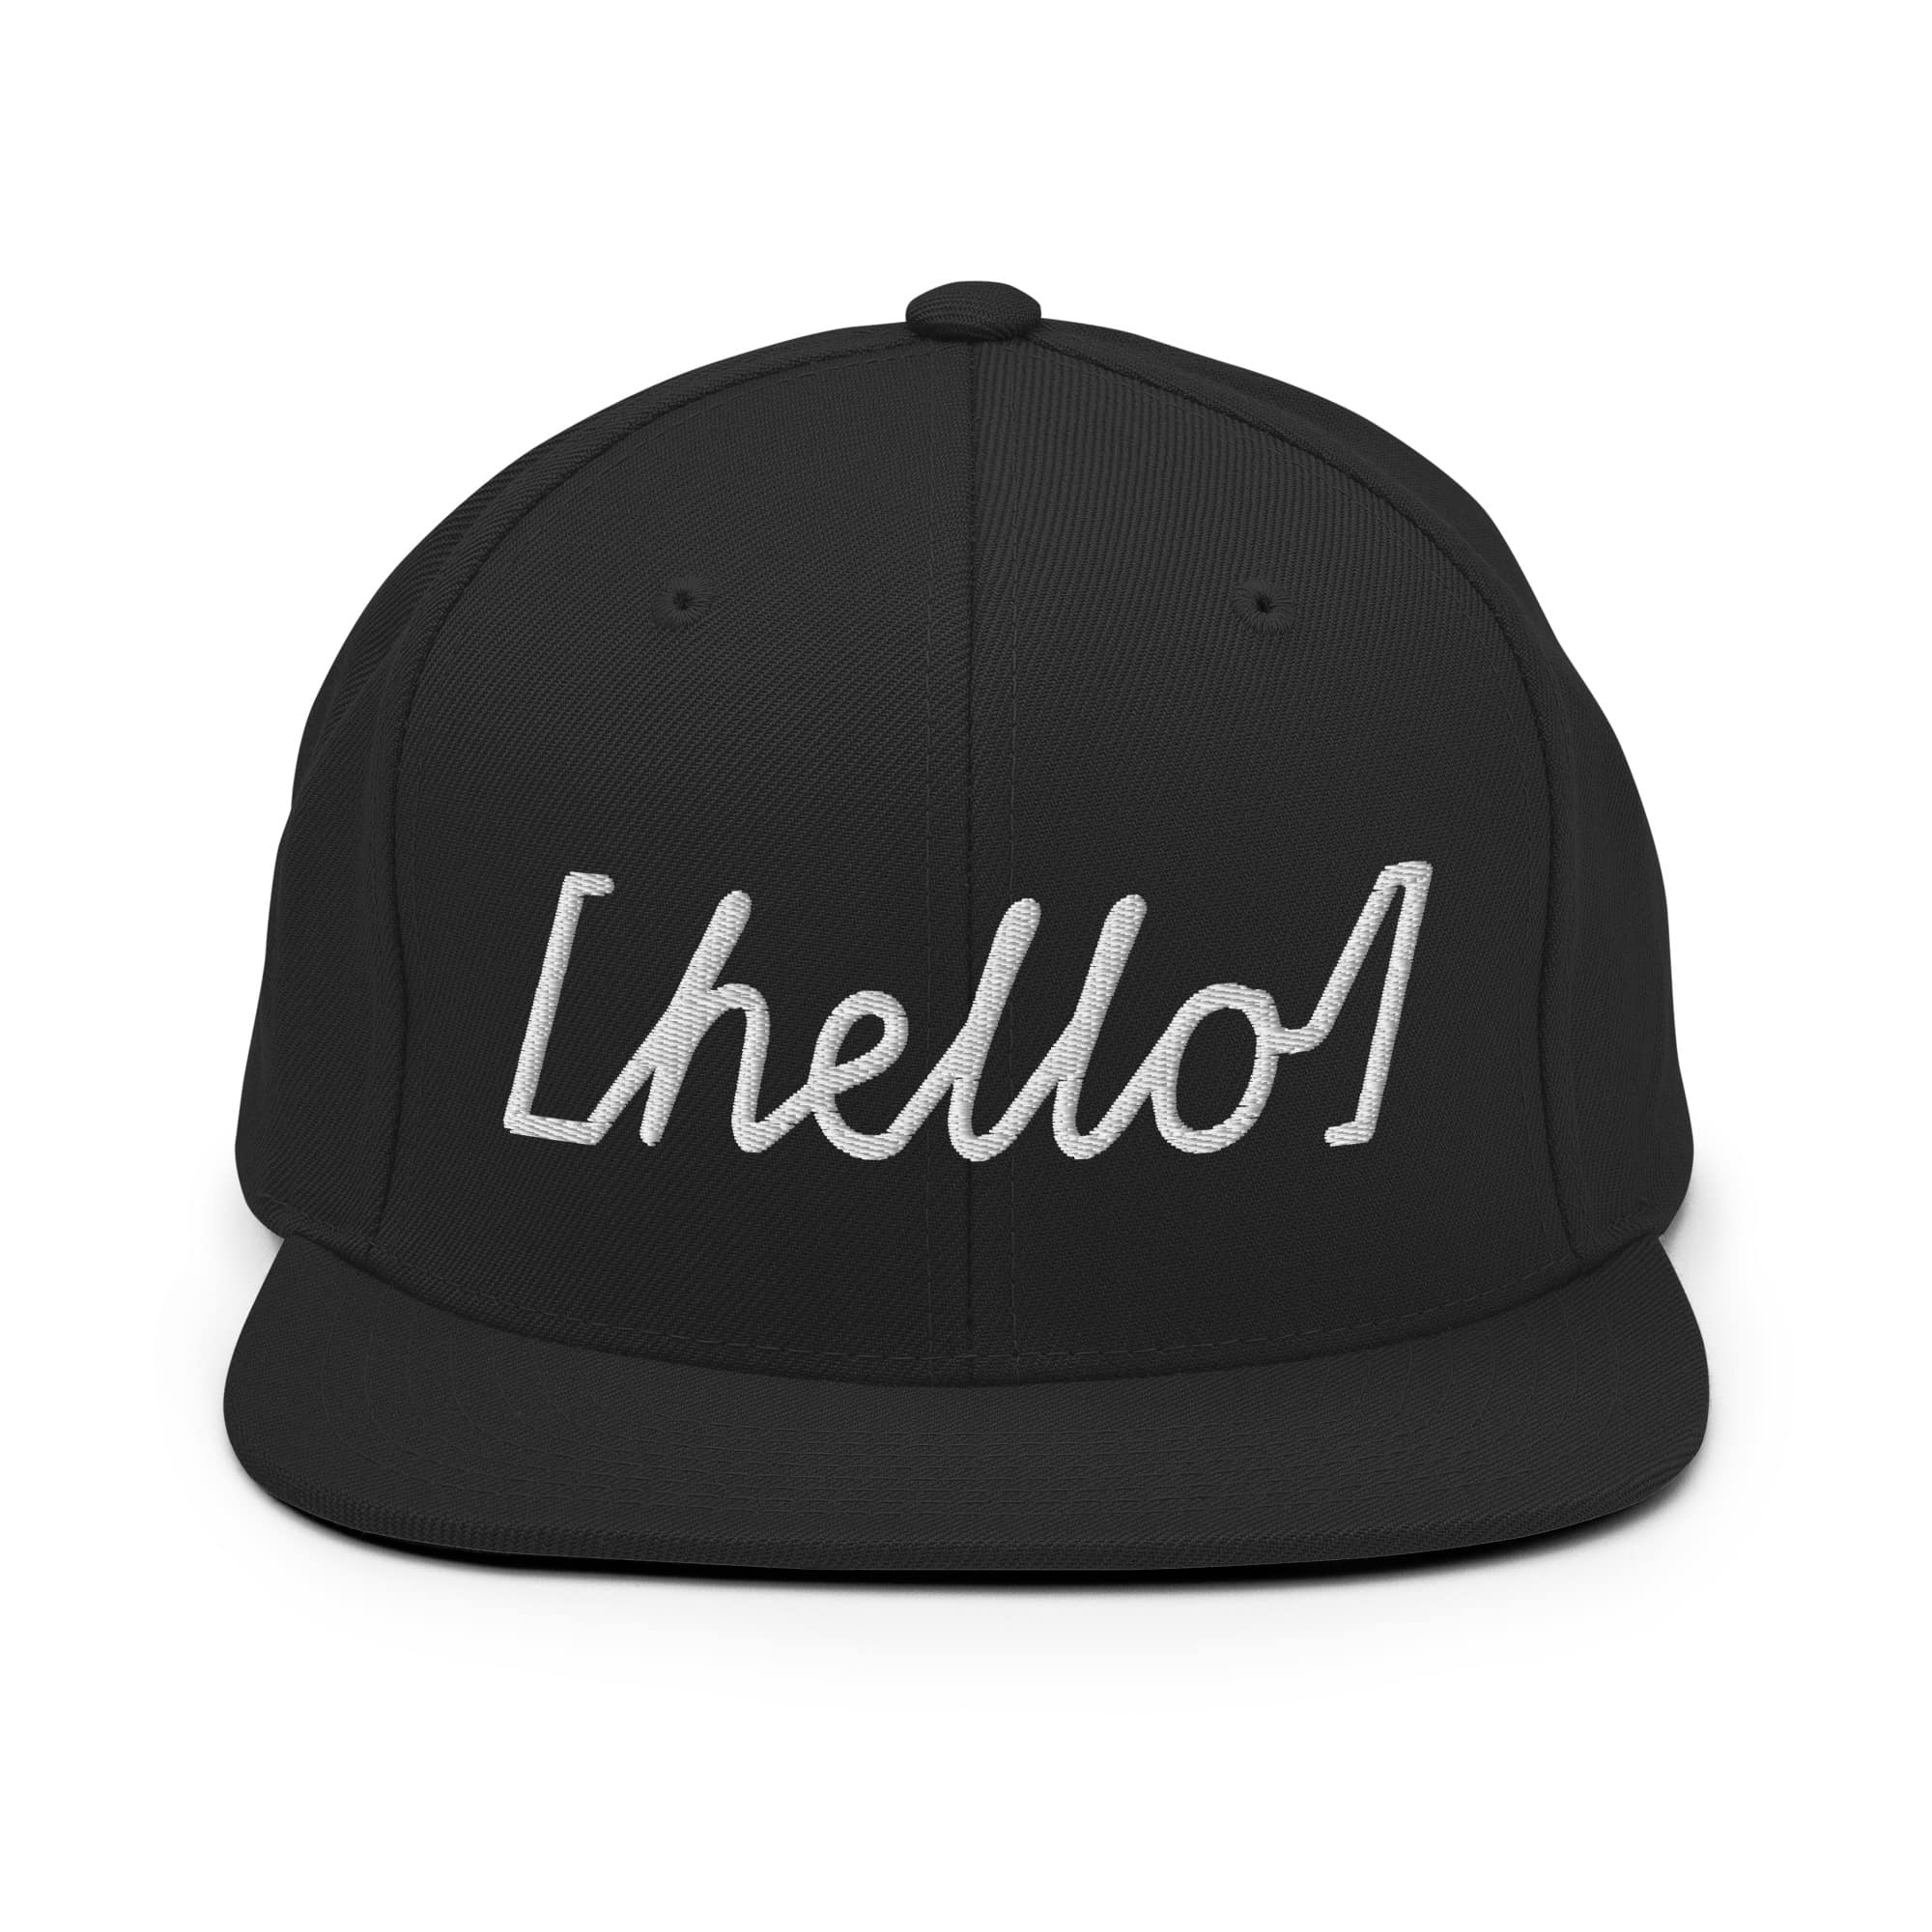 Hello Snapback Hat Video game store Gaming merchandise Gaming accessories shop Online gaming store Video game shop near me Gaming console store PC gaming store Gaming gear shop Retro gaming shop Board game shop Anime merchandise Anime store online Japanese anime shop Anime figurines Manga shop Anime DVDs Anime accessories Anime apparel Anime collectibles Anime gifts